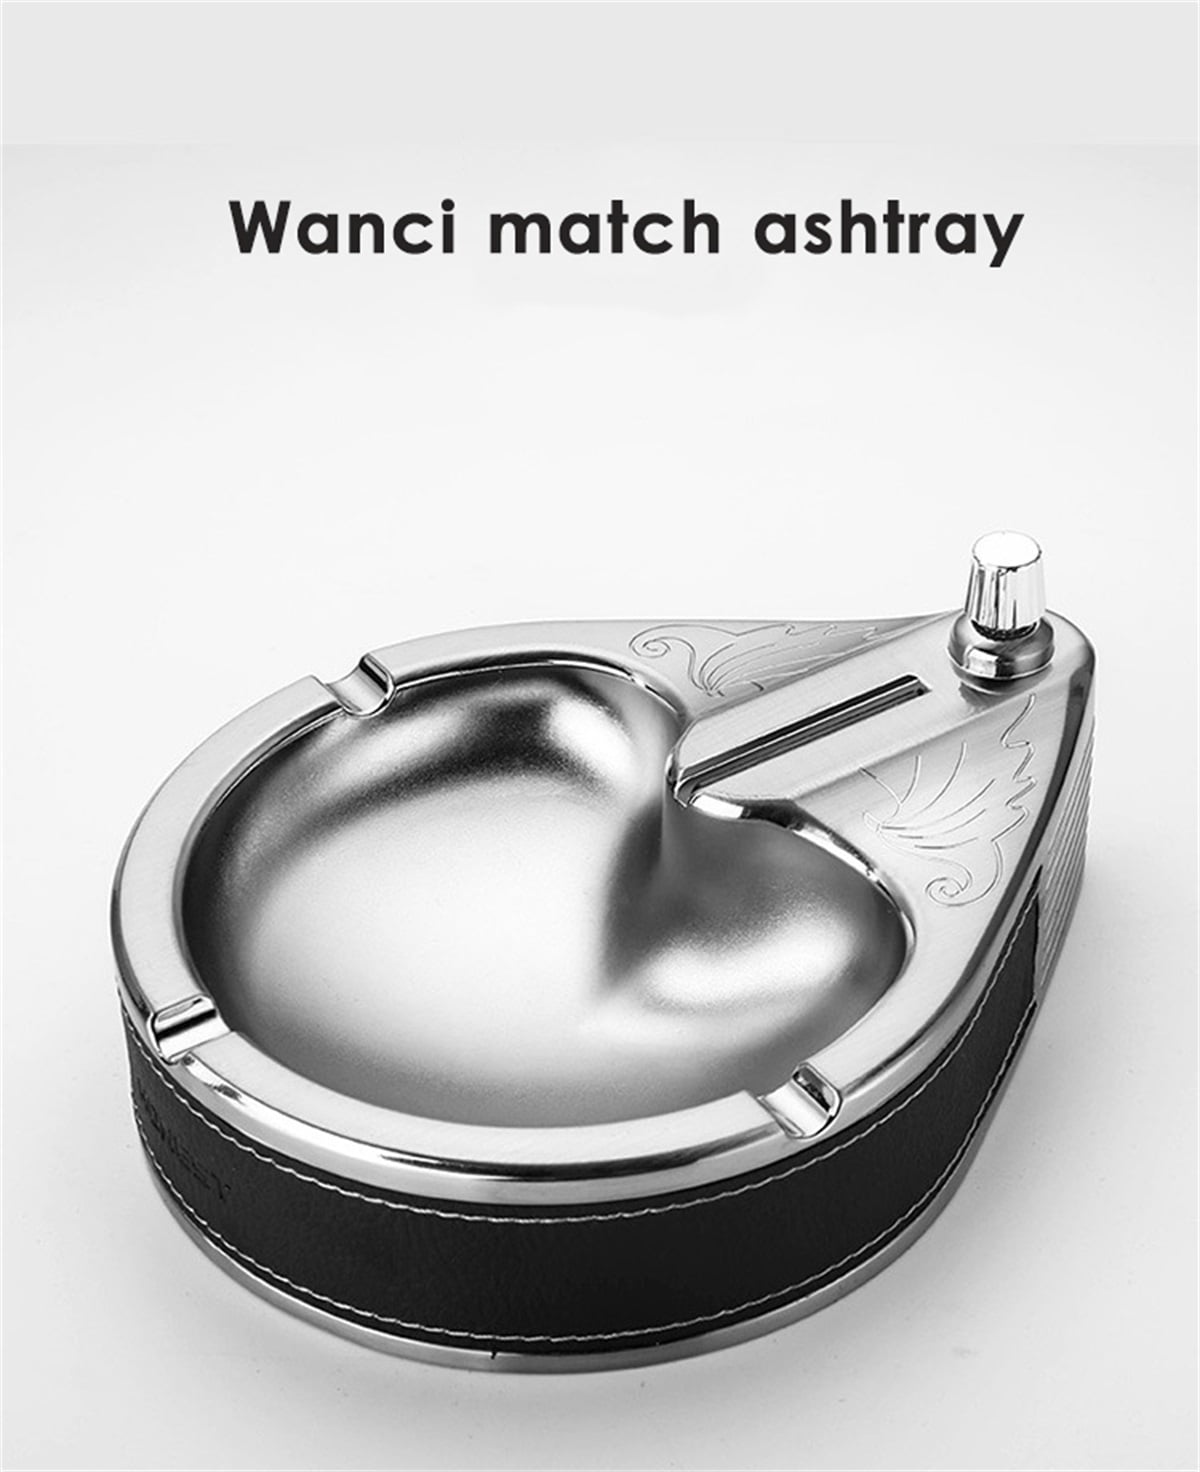 Metal Ashtray With Unlimited Matches Household Living Room Office Ashtray Kerosene Lighter With Ashtray